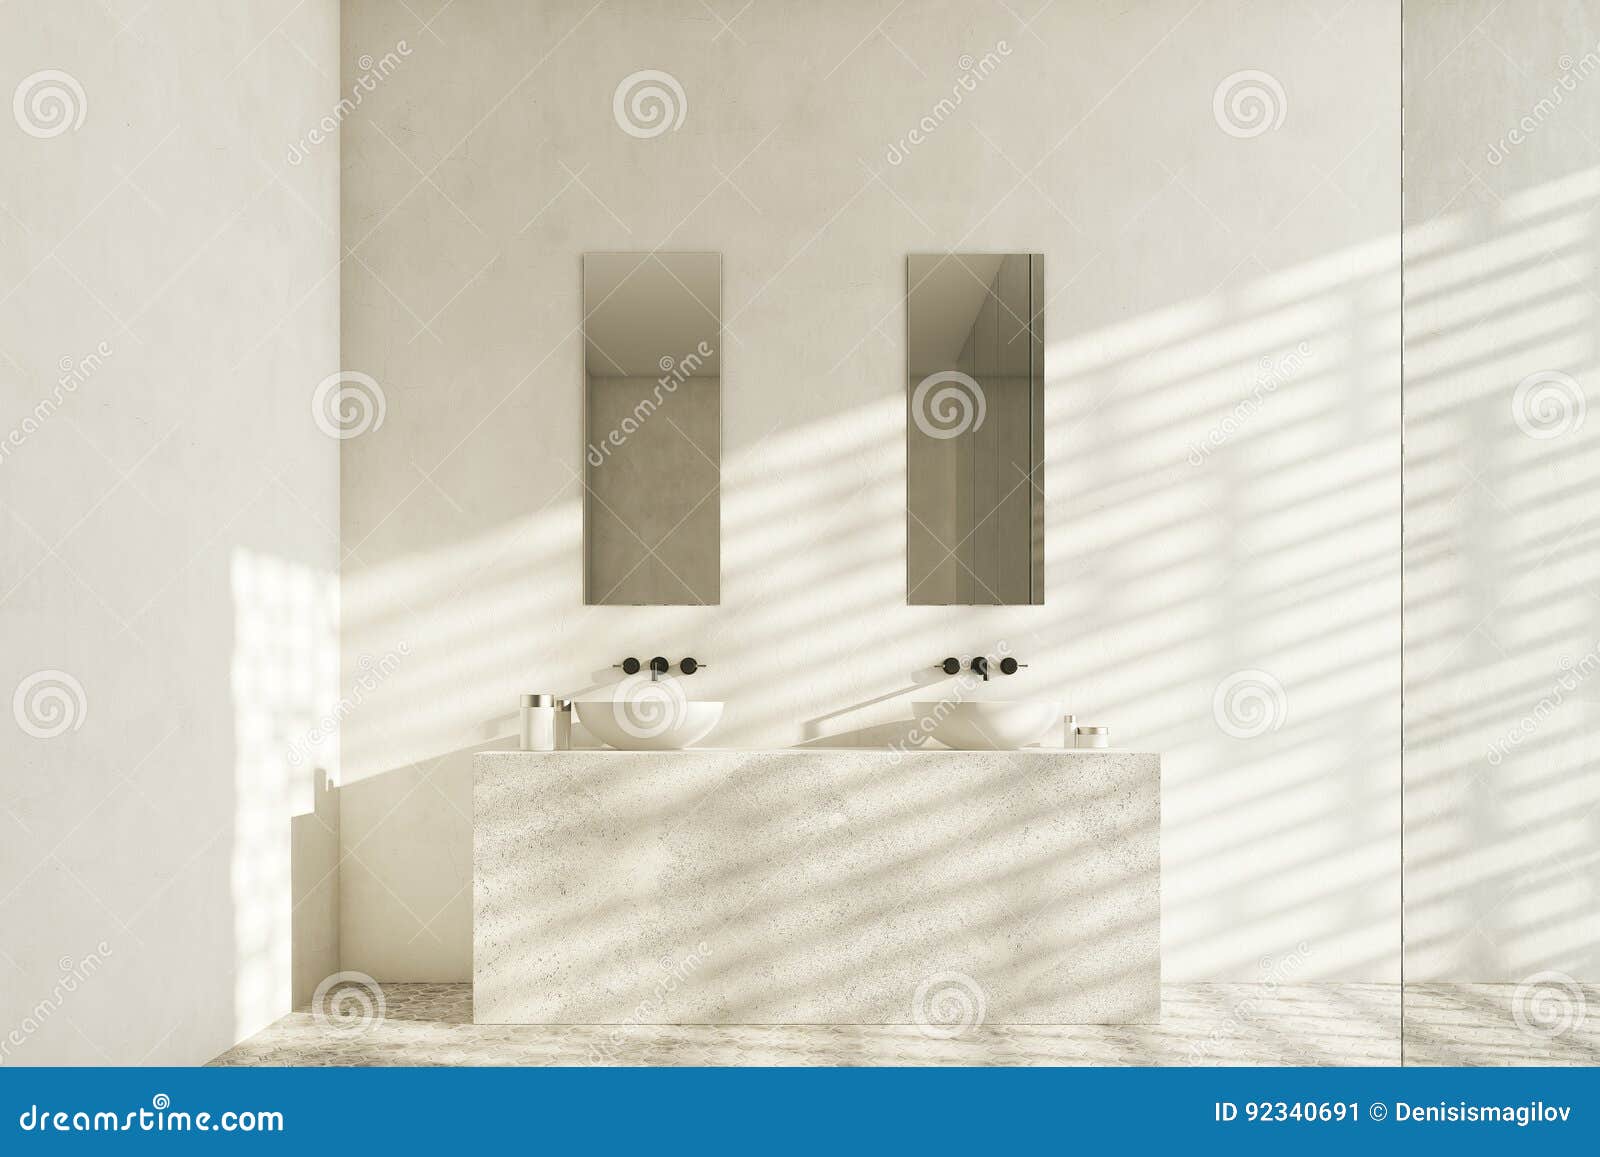 two bathroom sinks front view white narrow rectangular mirrors hanging above them d rendering 92340691